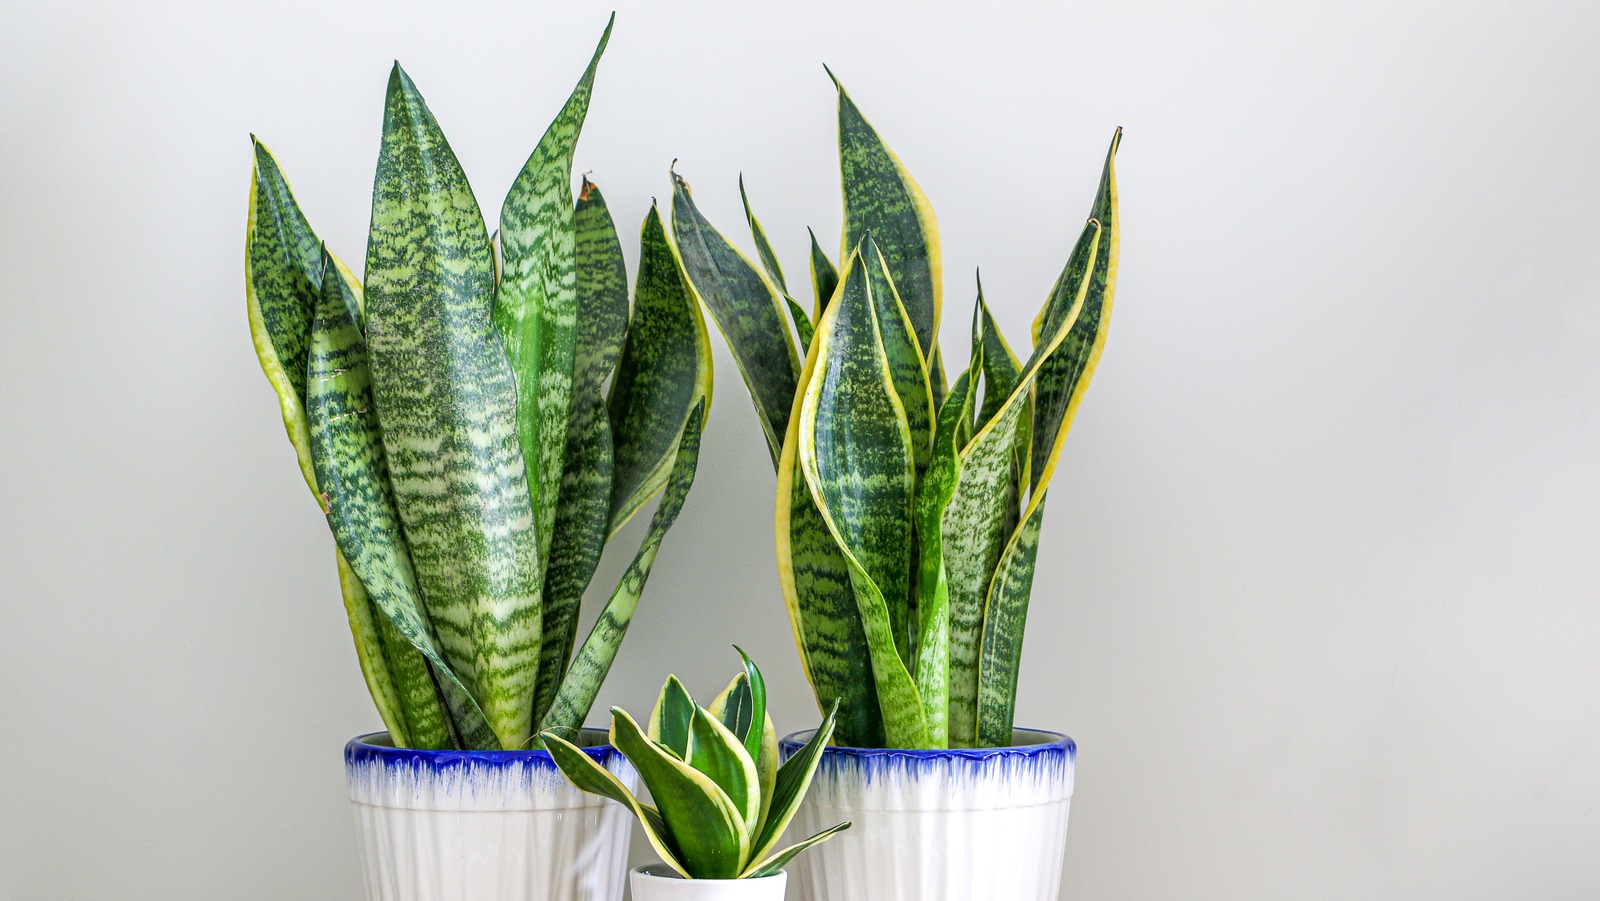 12 Issues You Should Know About Before Snake Plants